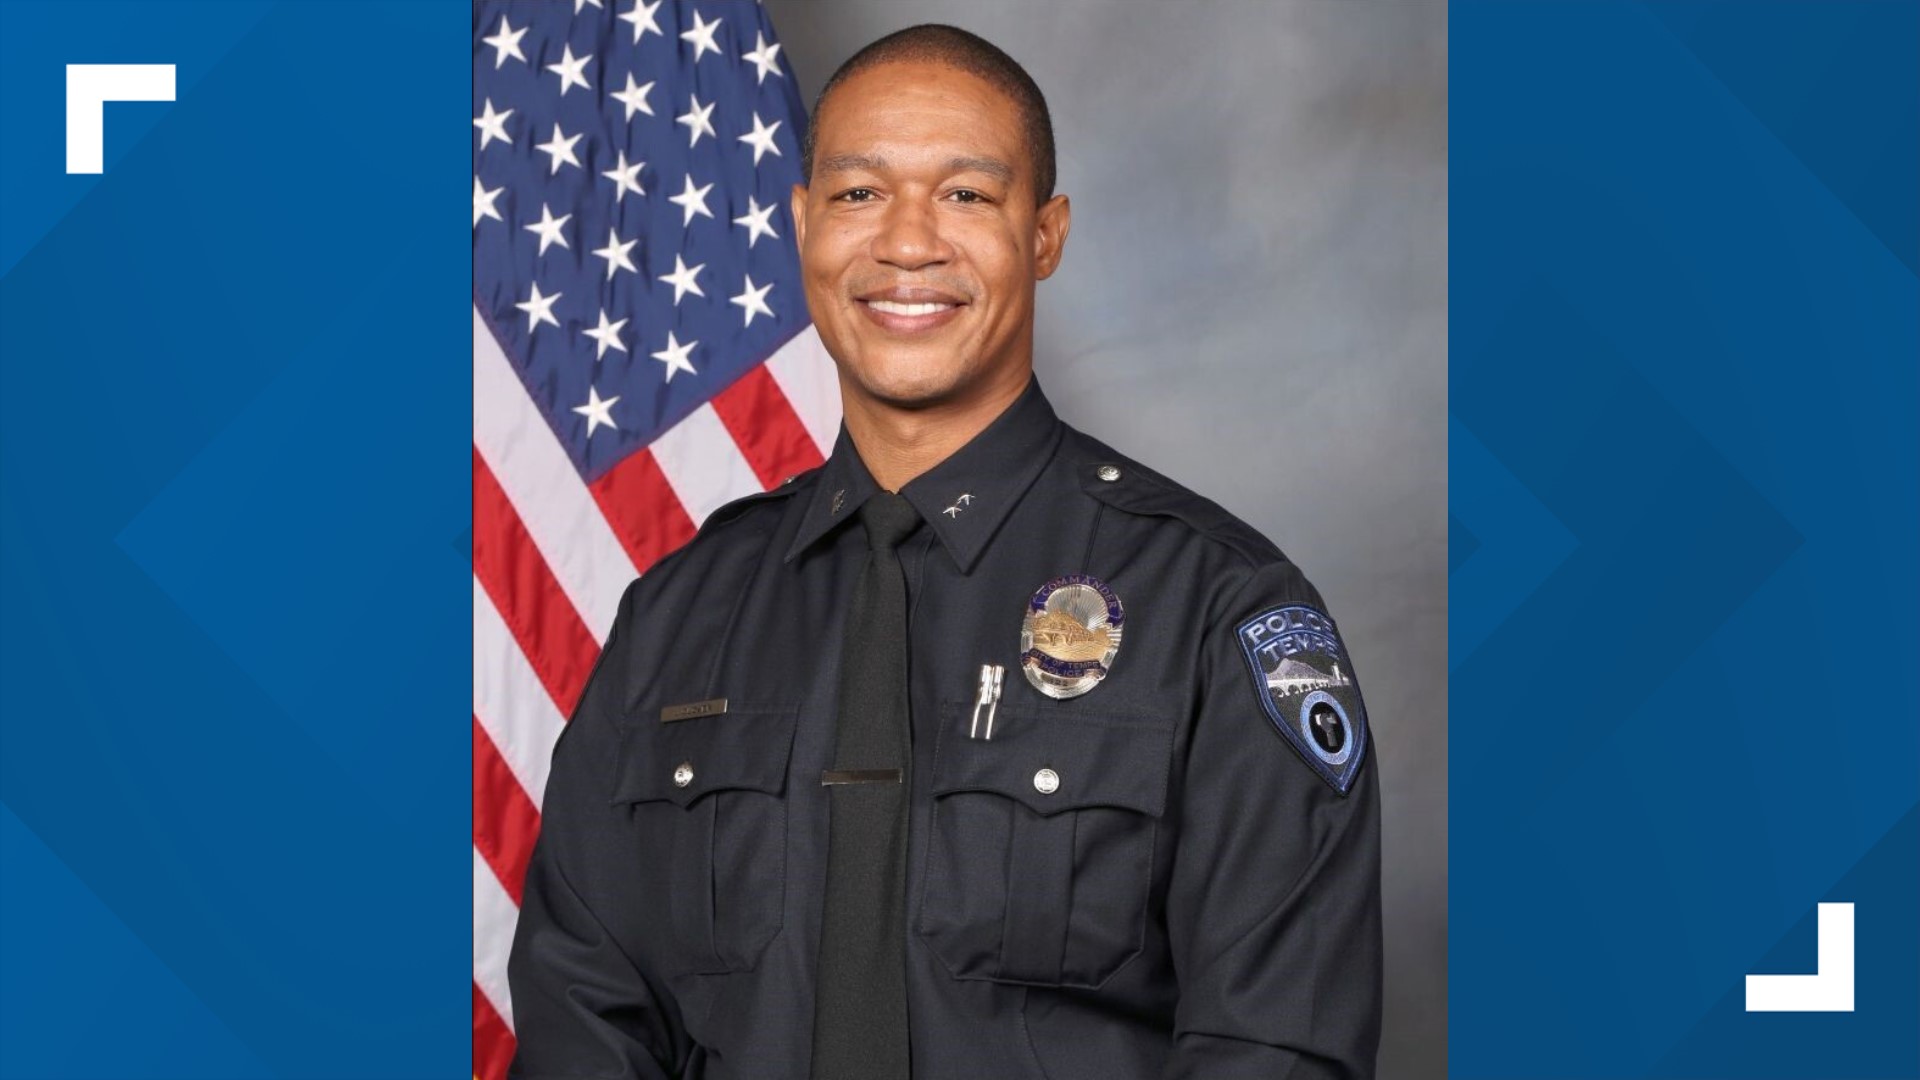 Chief Jeffrey Glover has worked for the Tempe Police Department since 1999.